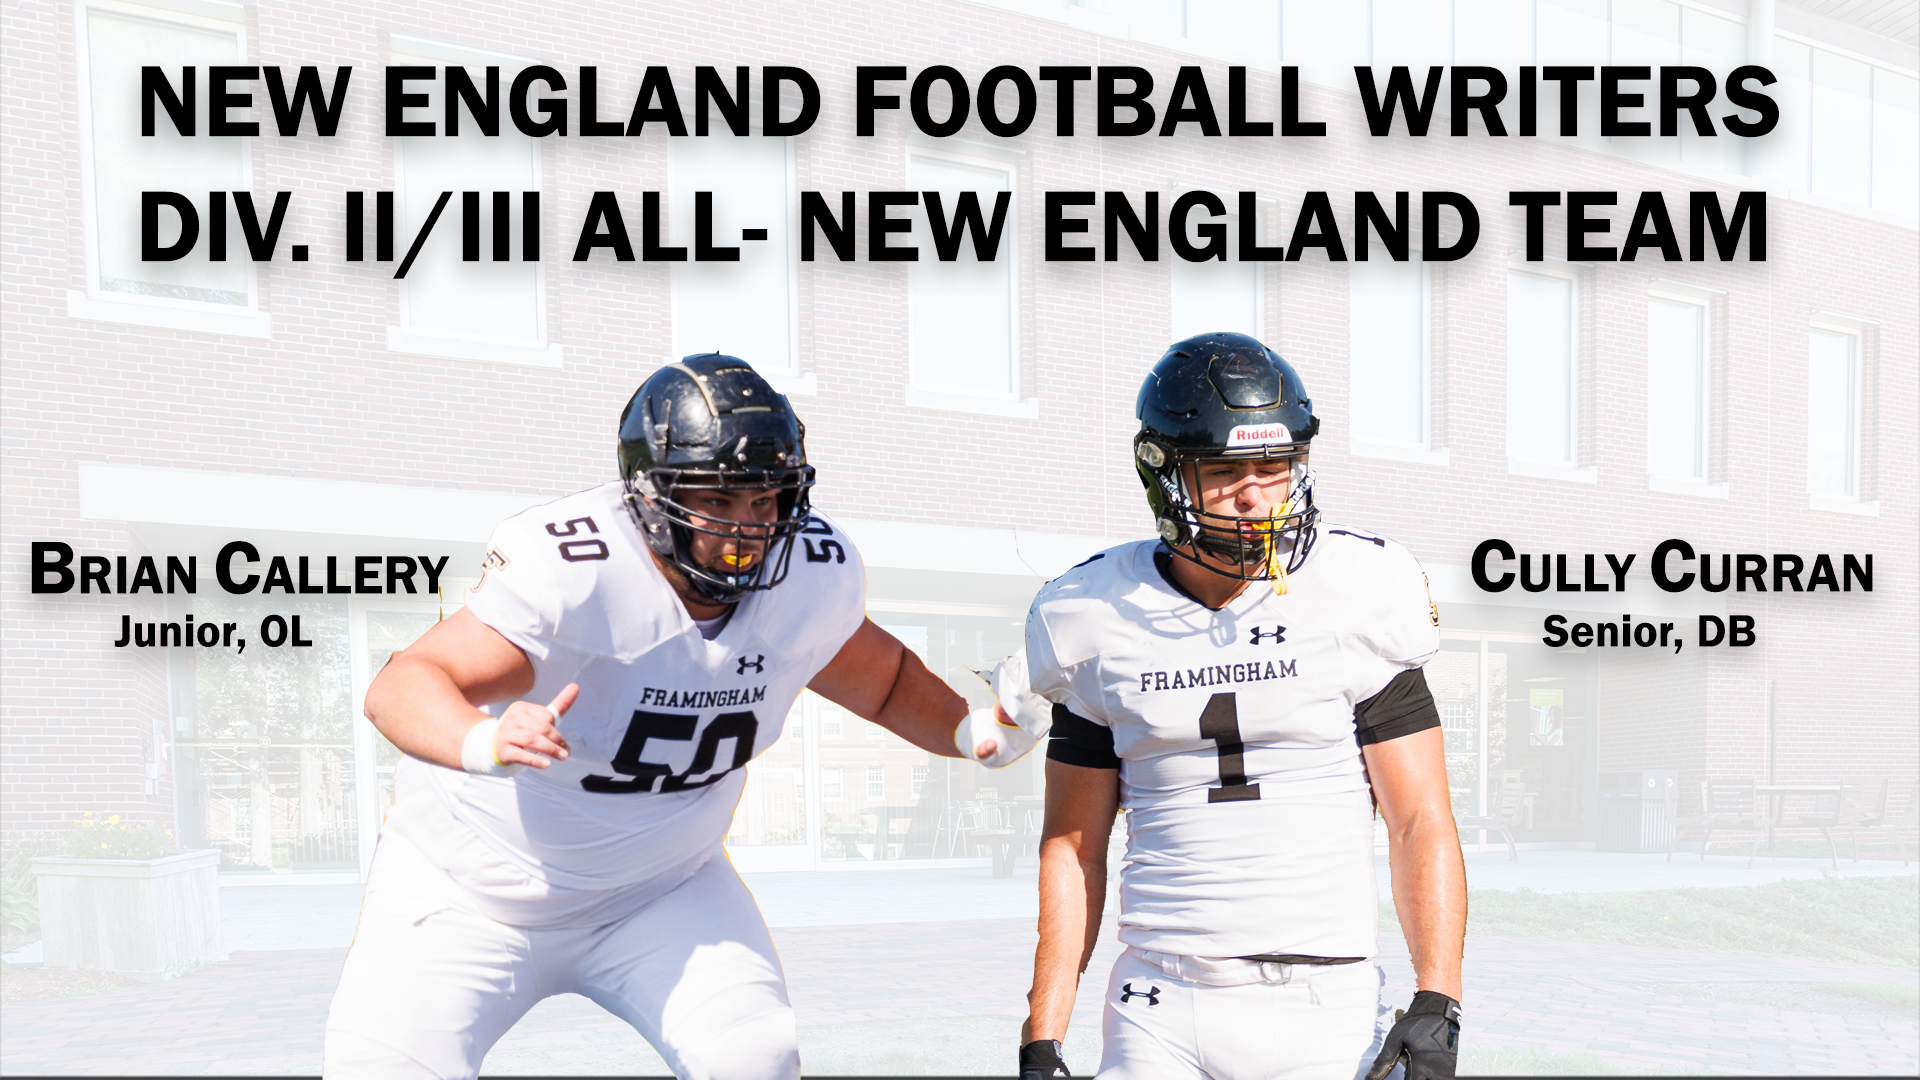 Curran & Callery Named to NEFW Division II/III All New England Team